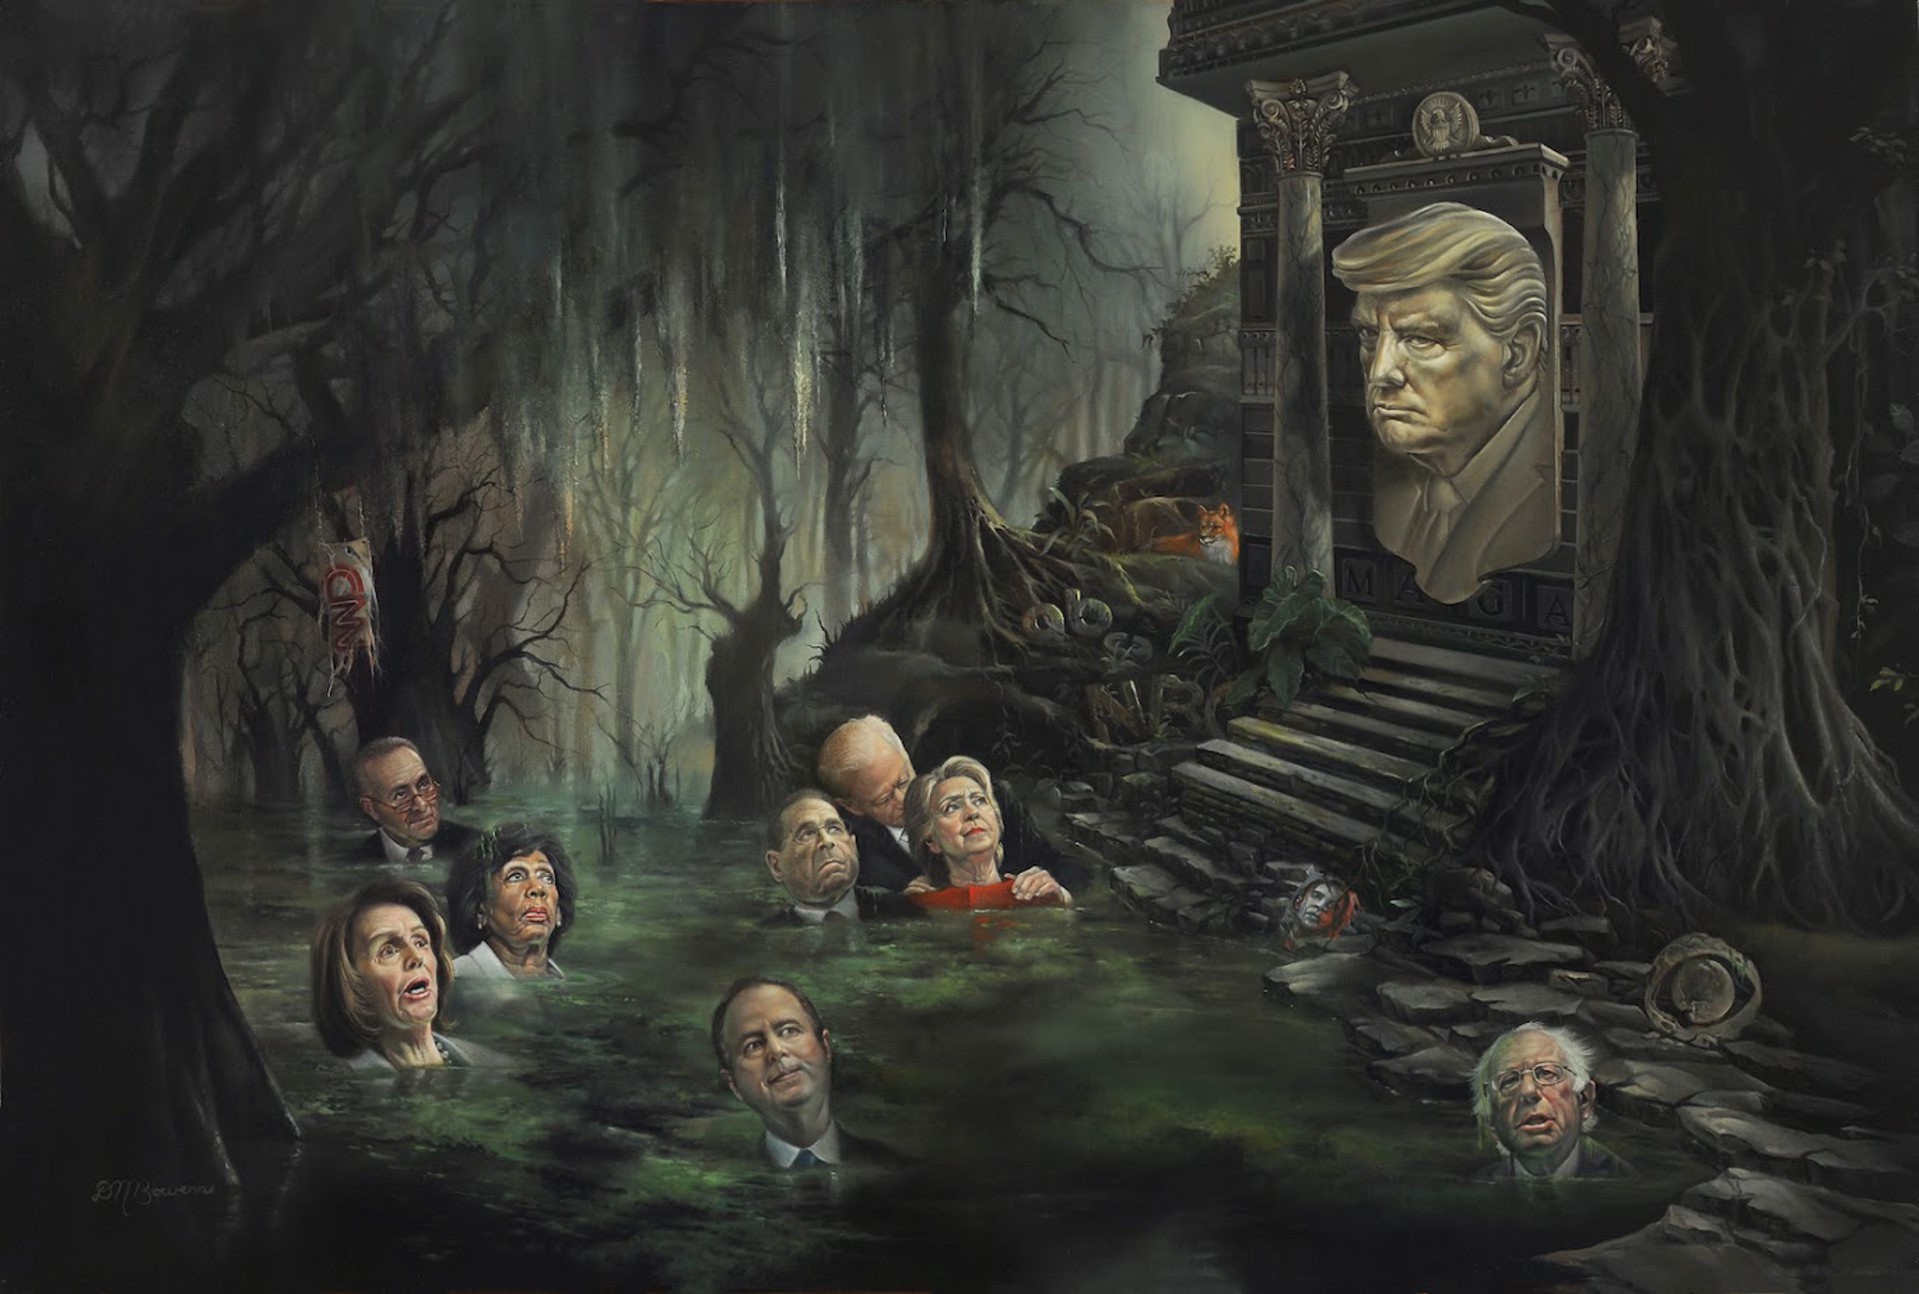 The Swamp by David Michael Bowers